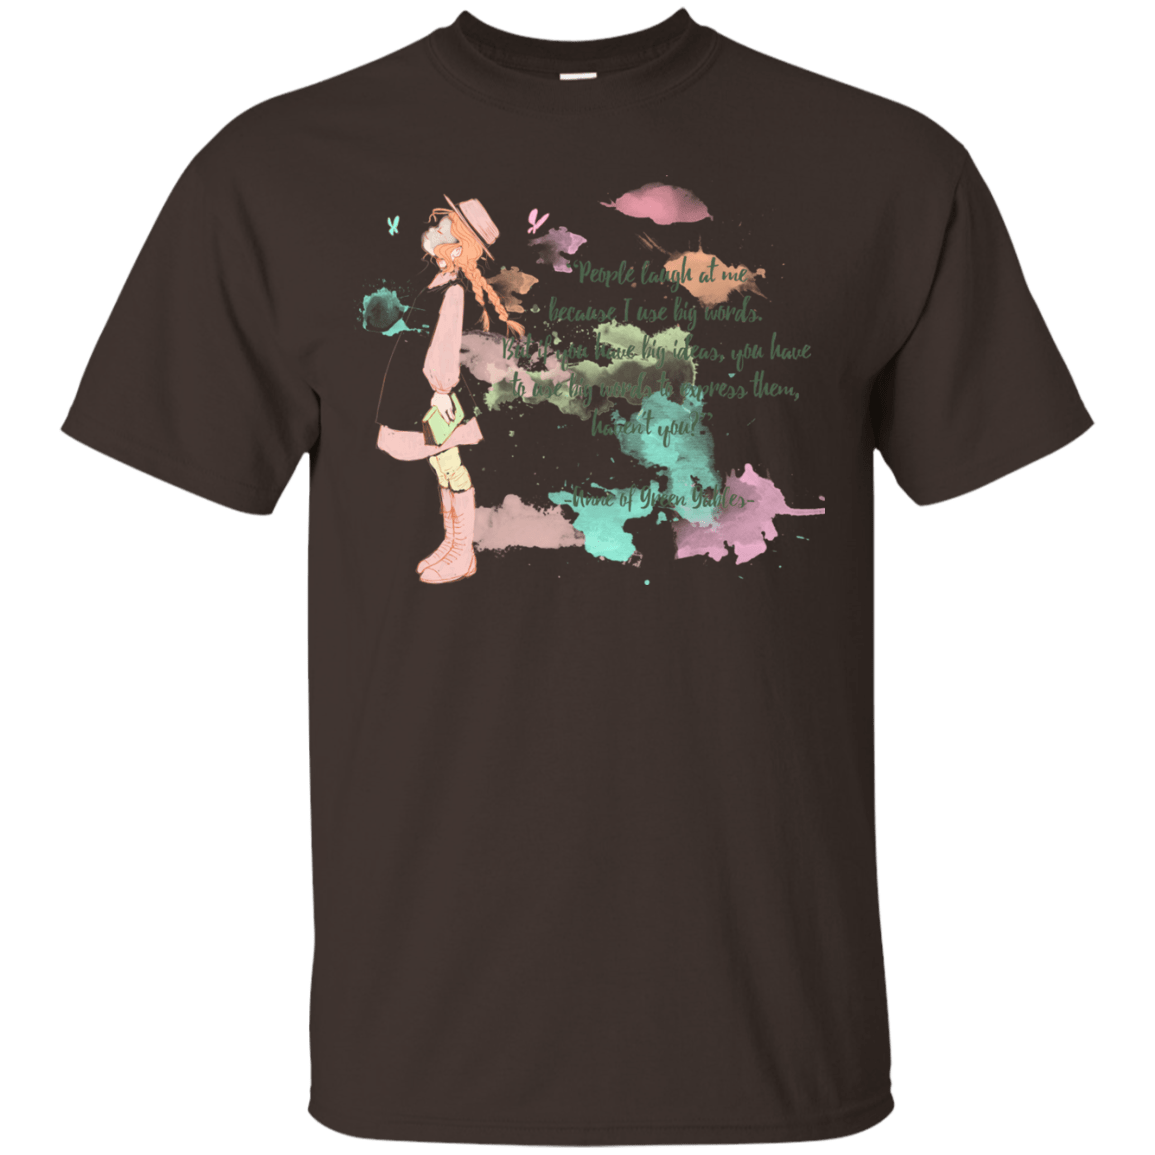 T-Shirts Dark Chocolate / Small Anne of Green Gables 3 T-Shirt